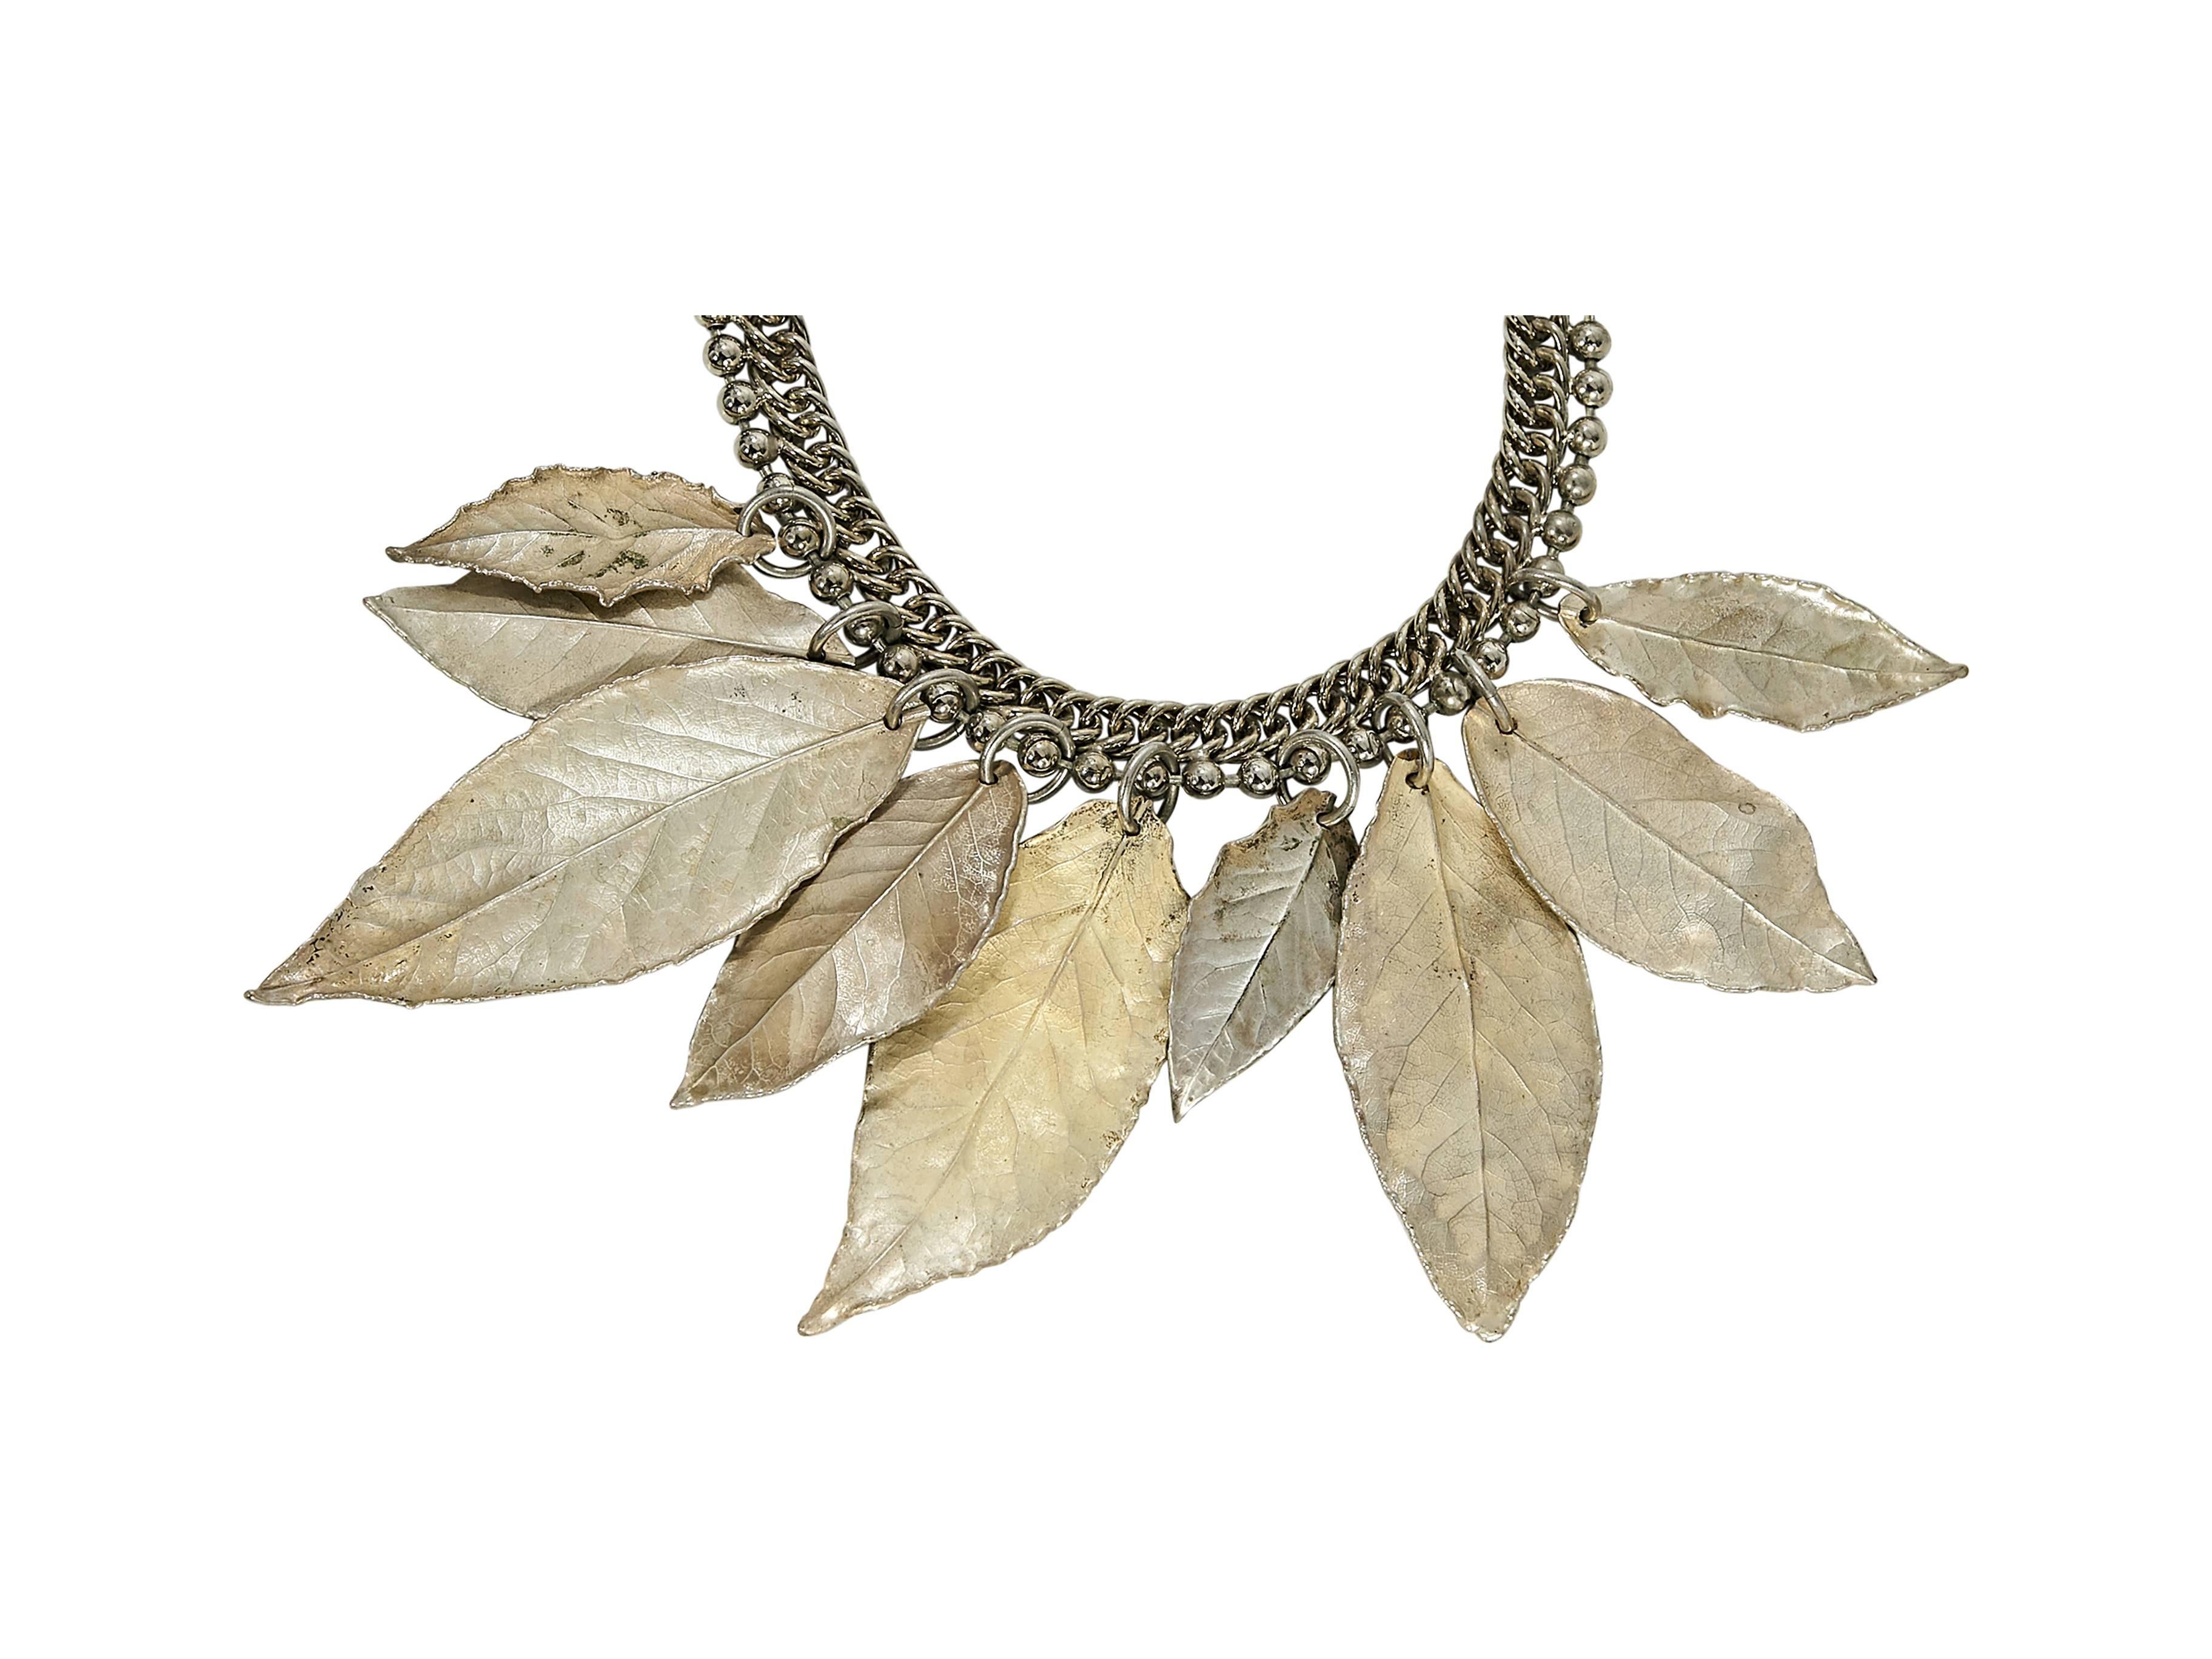 Product details:  Goldtone chain collar necklace by Marni.  Accented with hanging leaf charms.  Adjustable tie closure. 
Condition: Pre-owned. Very good.

Est. Retail $ 595.00